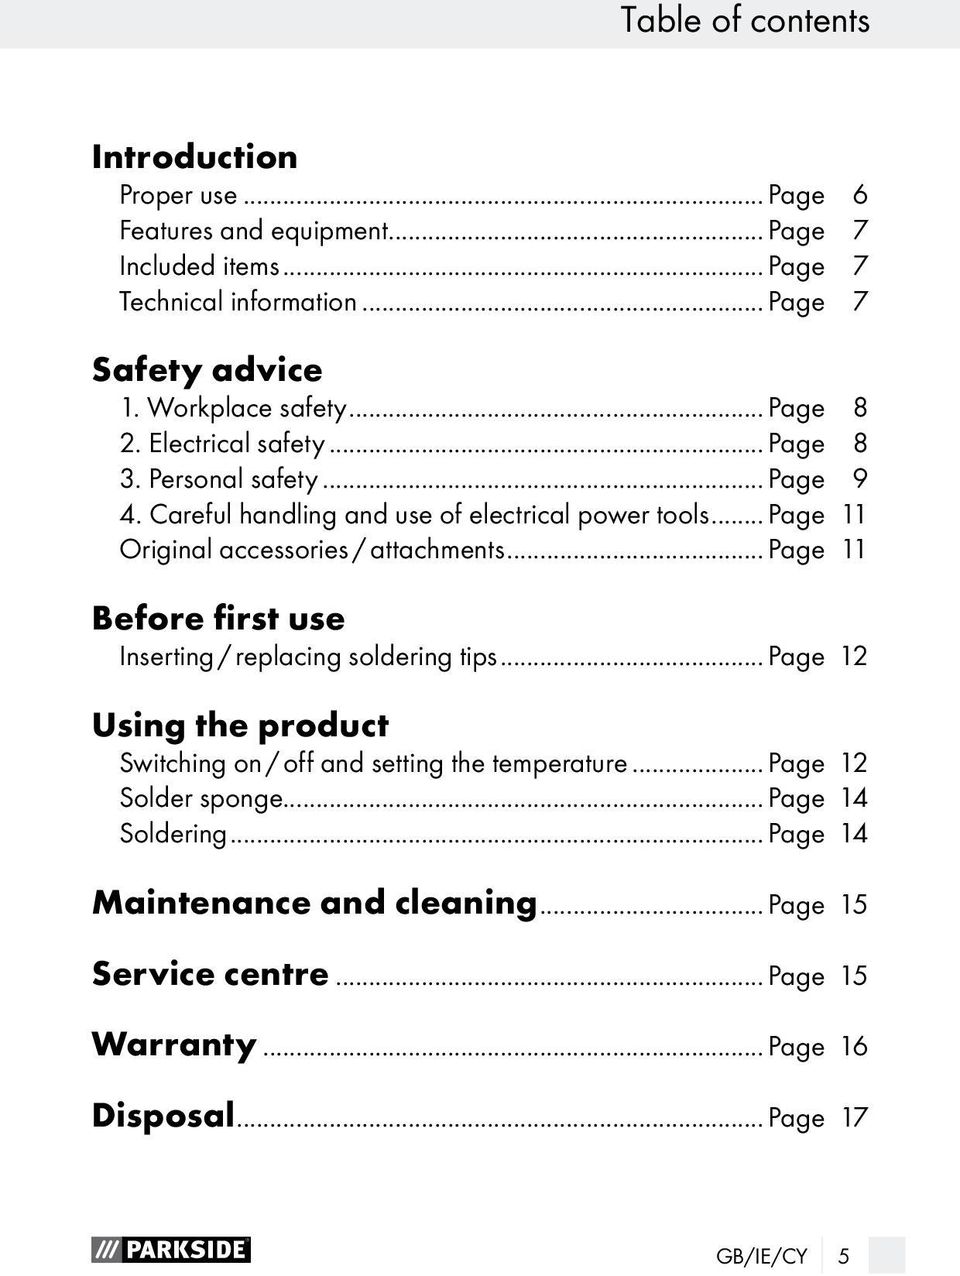 .. Page 11 Original accessories / attachments... Page 11 Before first use Inserting / replacing soldering tips.